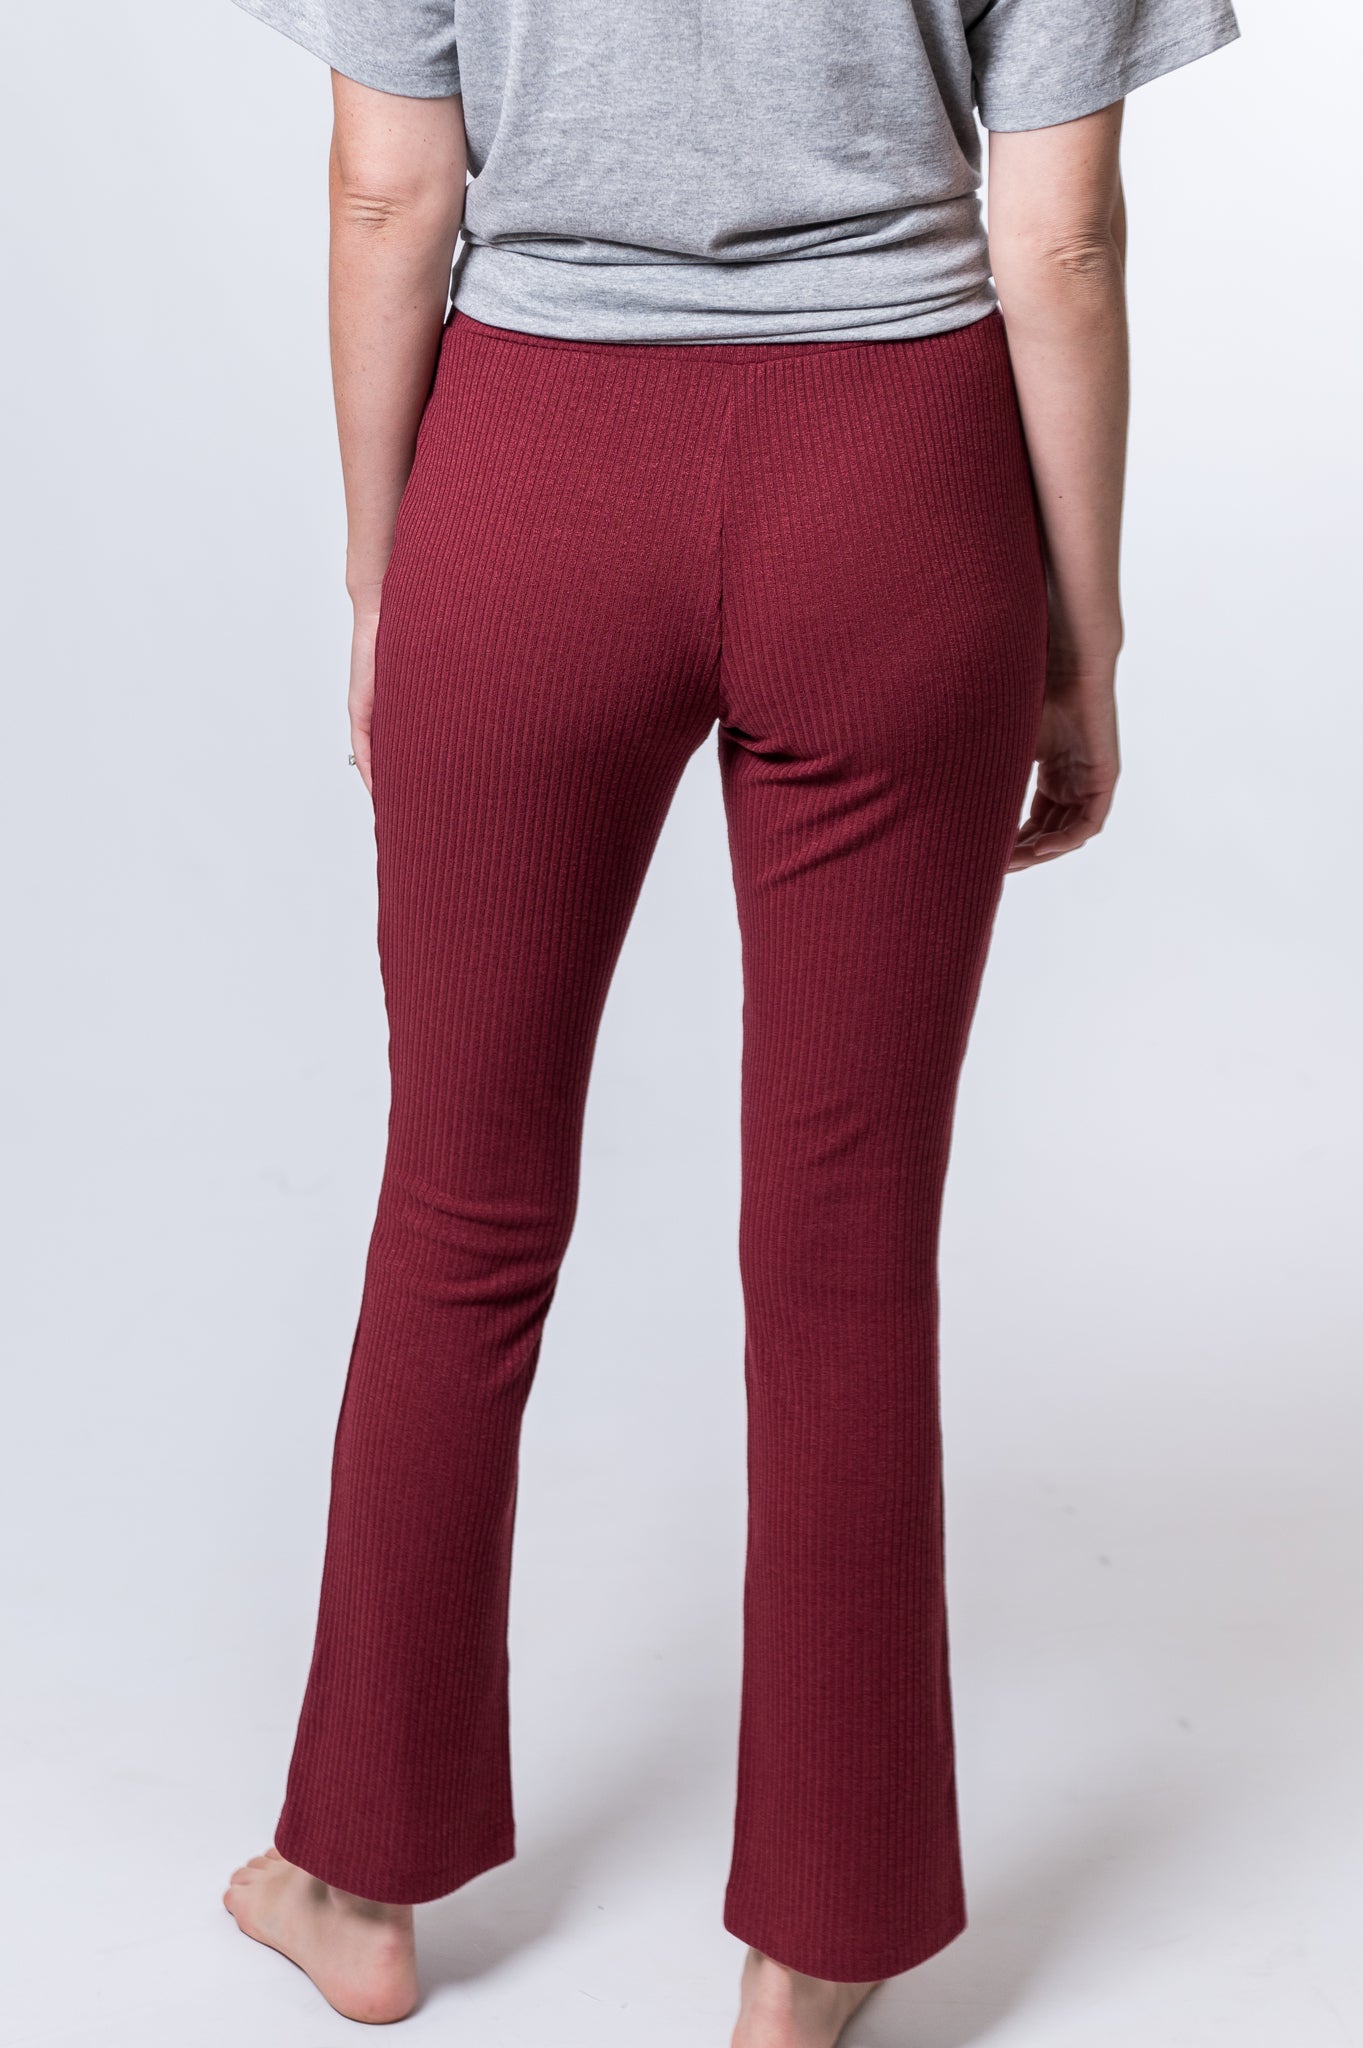 Woman wearing maroon drawstring lounge pants and a gray top. Back of clothing is being shown